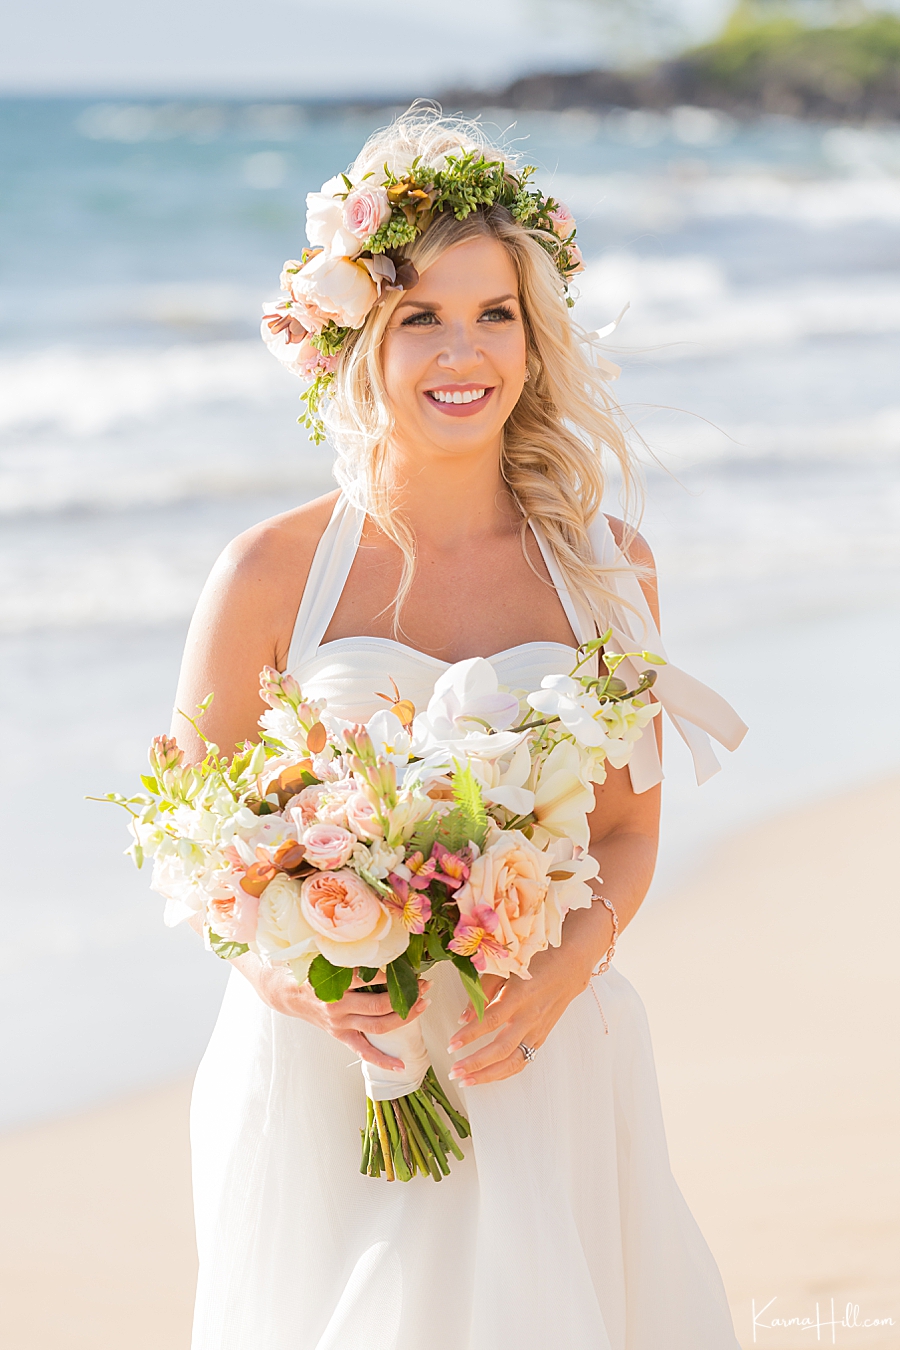 bride with blonde hair and flower crown carries an orchid lei on the beach 